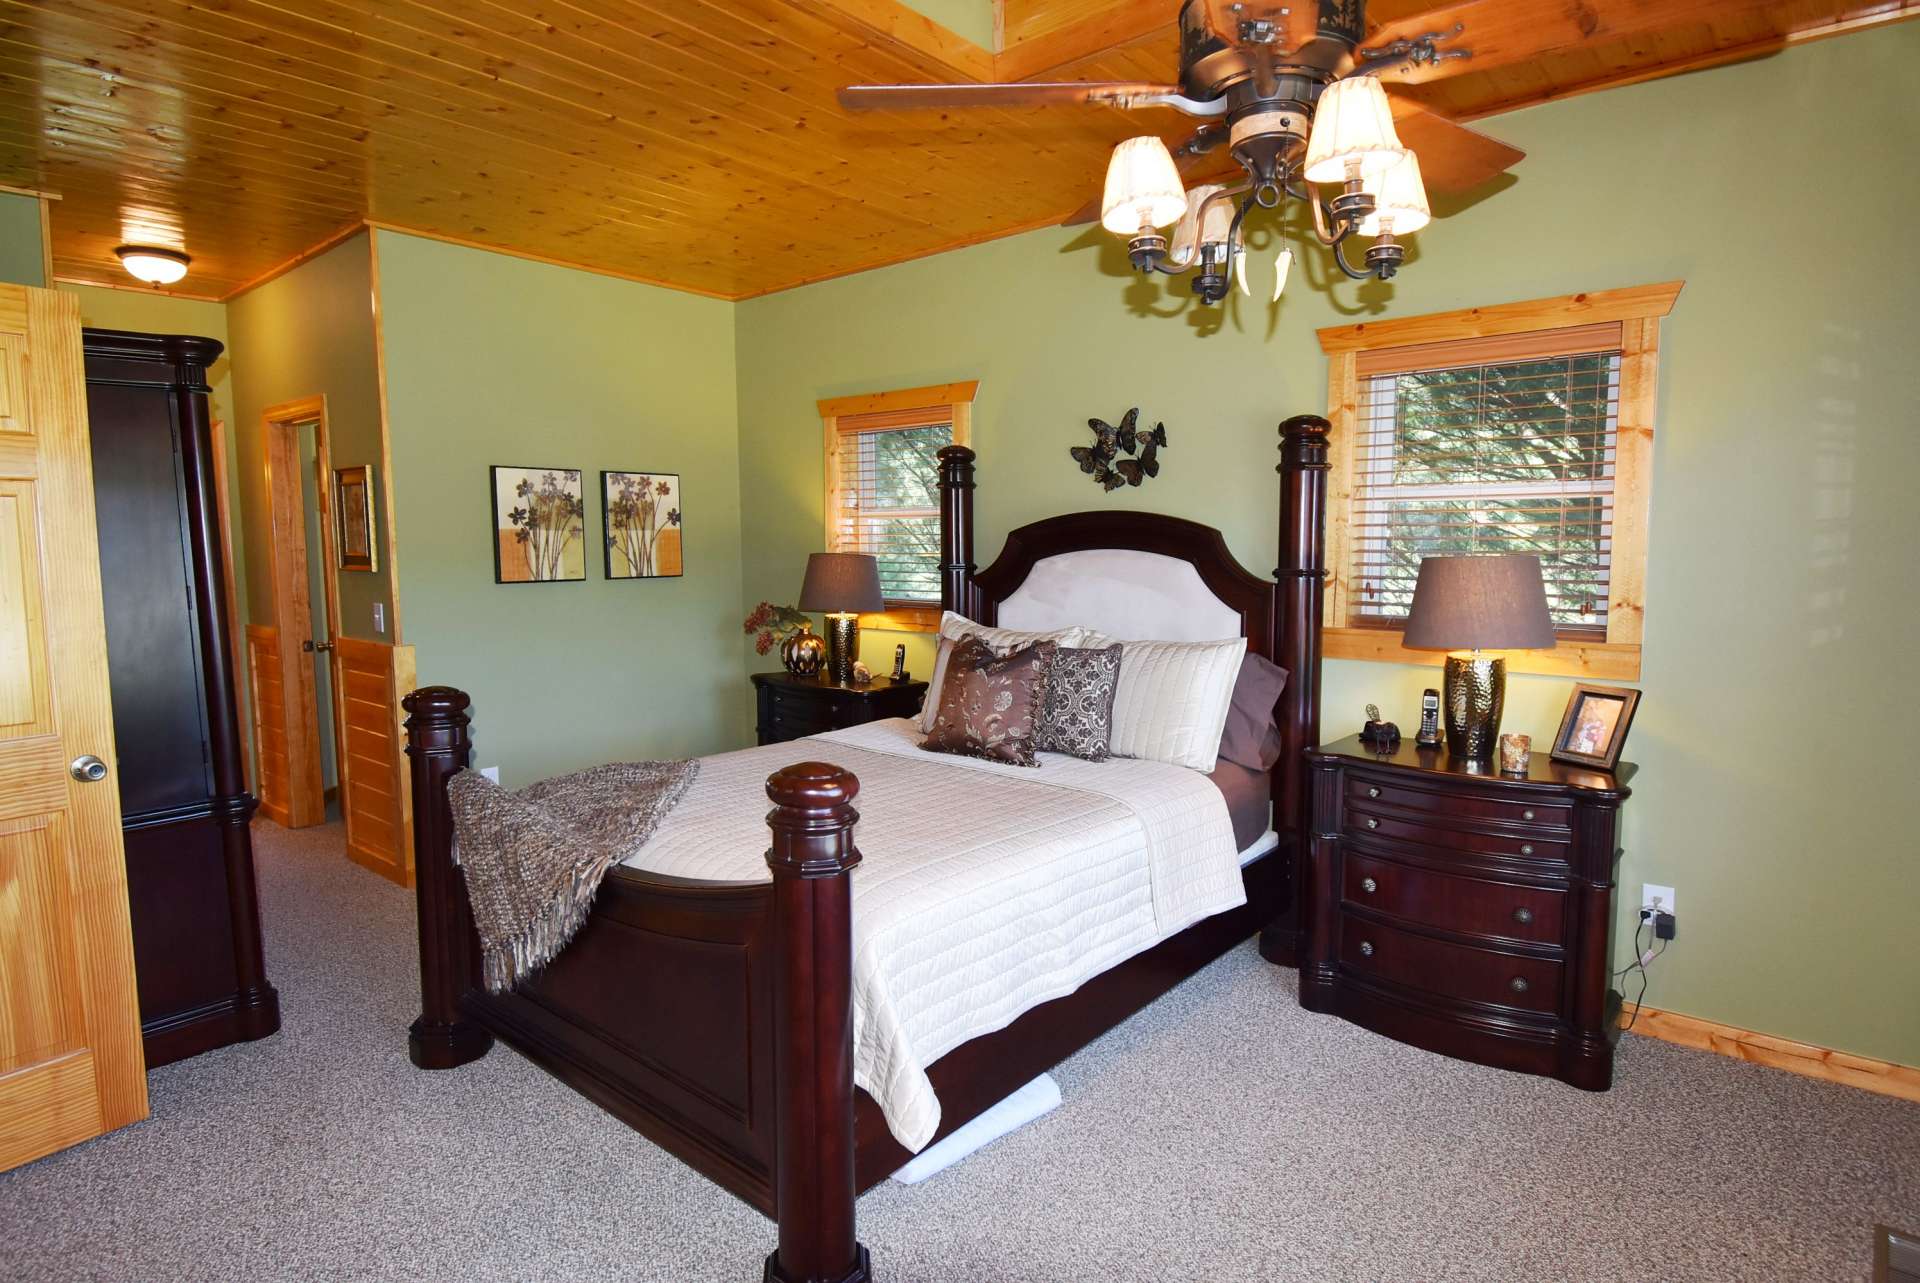 The main level master suite features vaulted ceiling, plenty of windows, and a private bath.